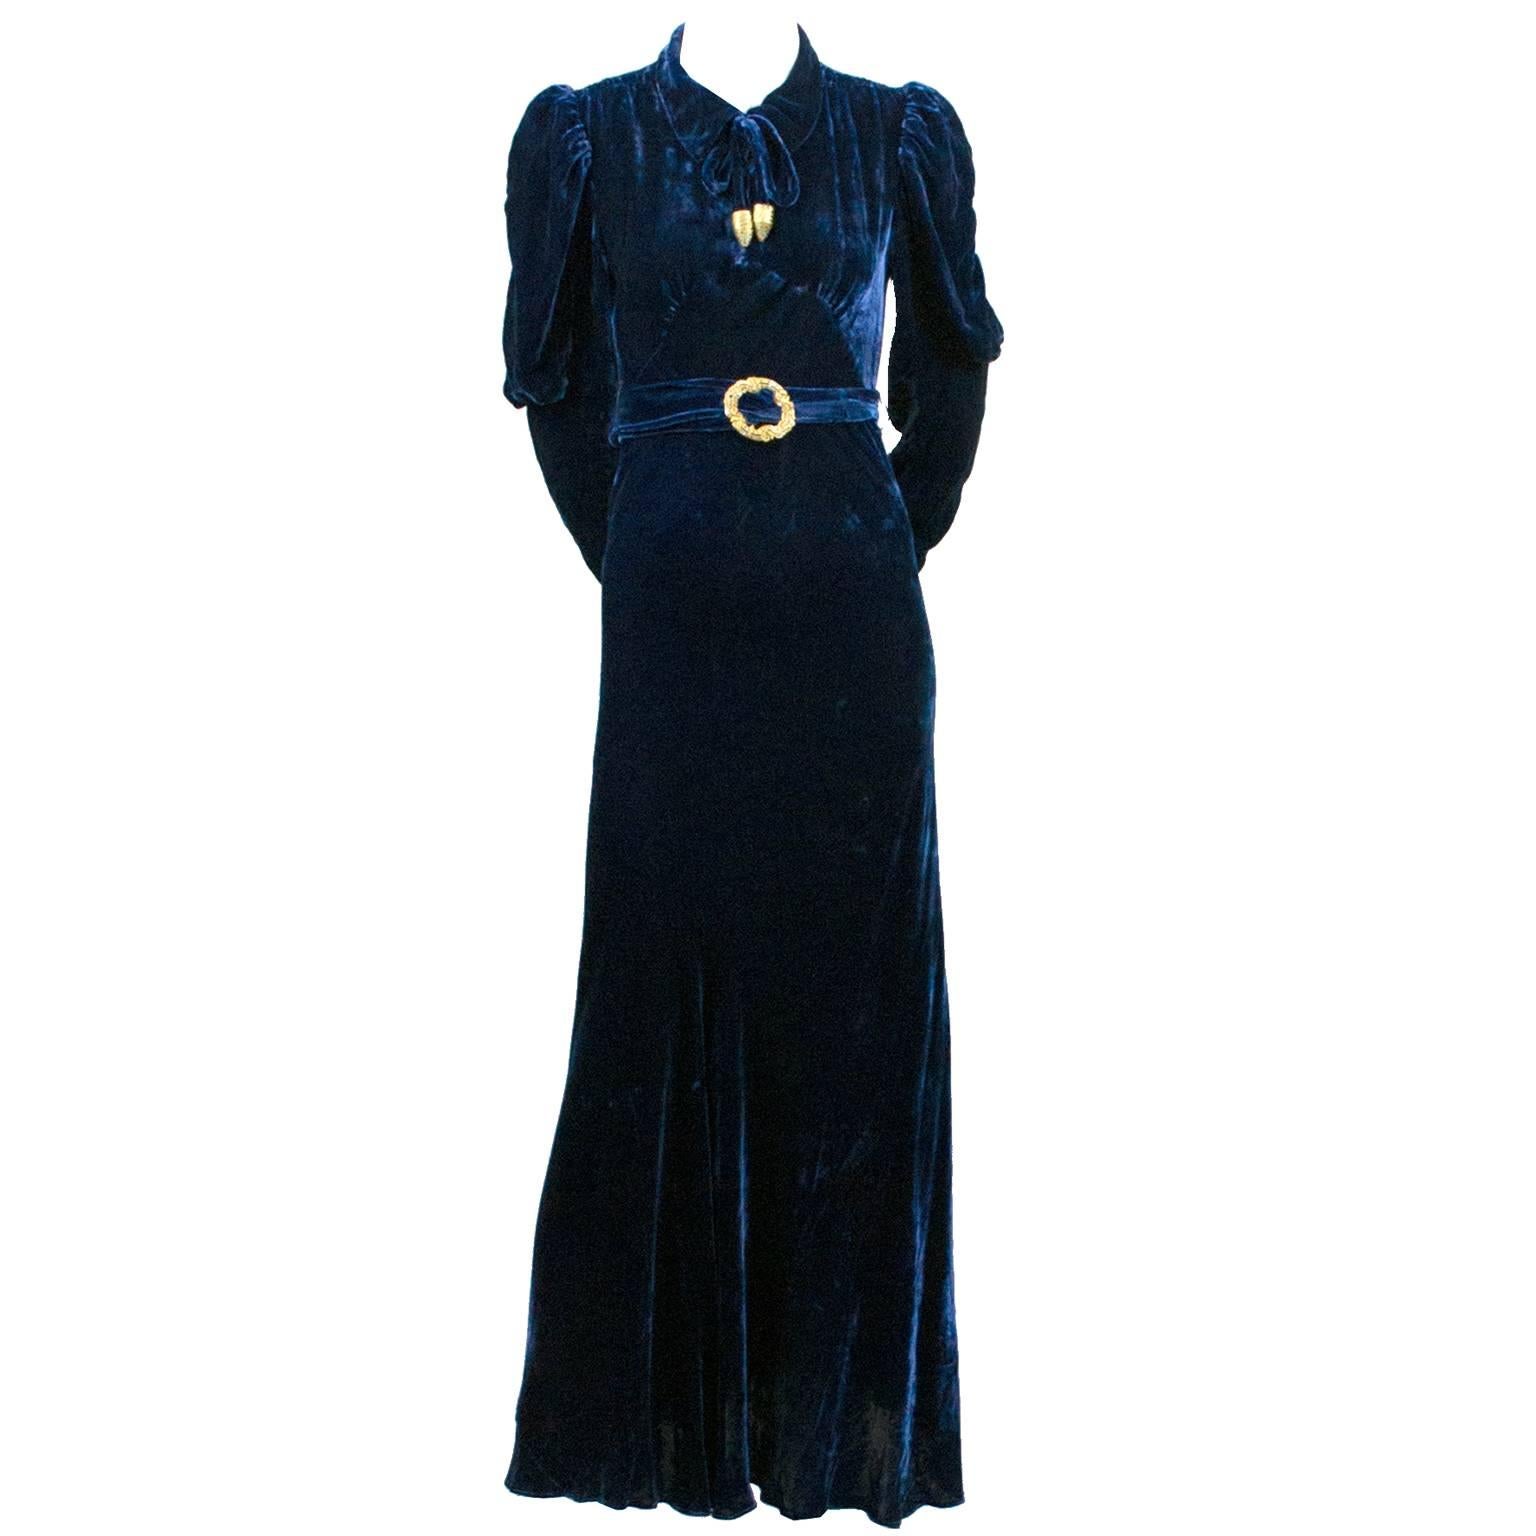 1930s Luxe Blue Velvet Vintage Dress Gold Buckle Aglets Mutton Sleeves Petite XS